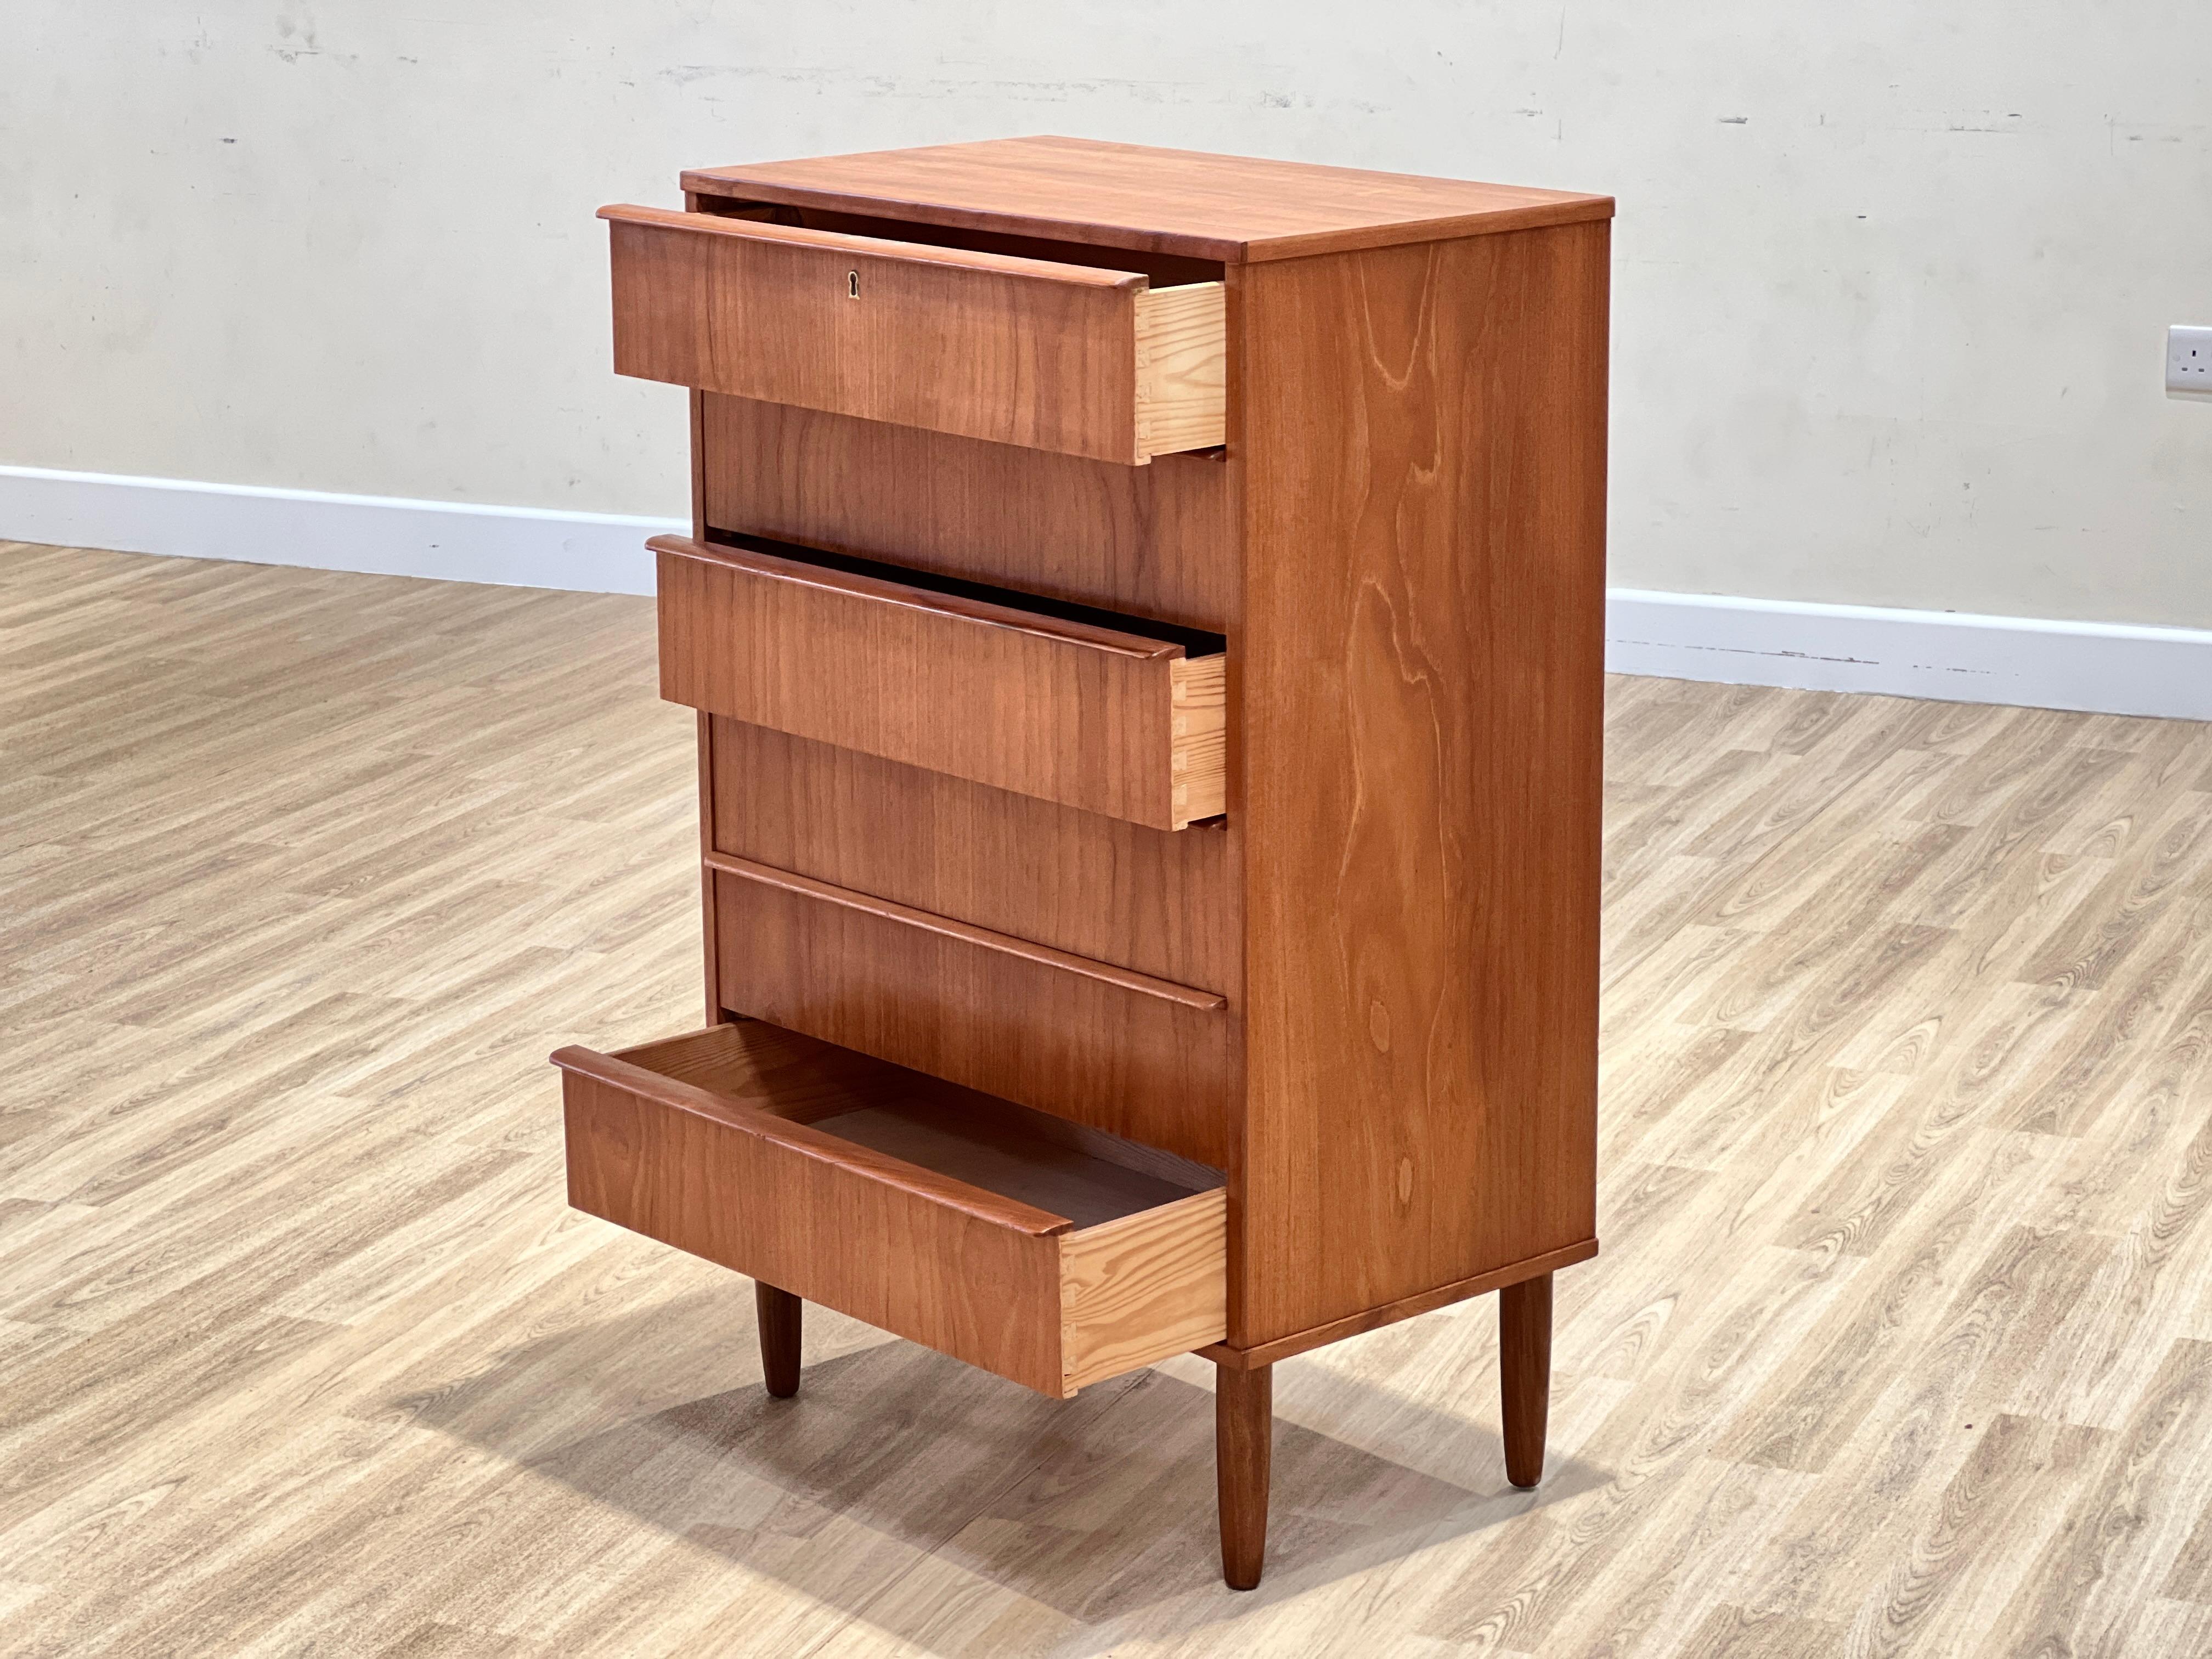 Danish teak chest of drawers with 6 drawers manufactured in Denmark in the mid-20th century.

The chest of drawers has a rational and minimalist design with elongated handles. It has 6 drawers that give us a large storage space.

The teak in the